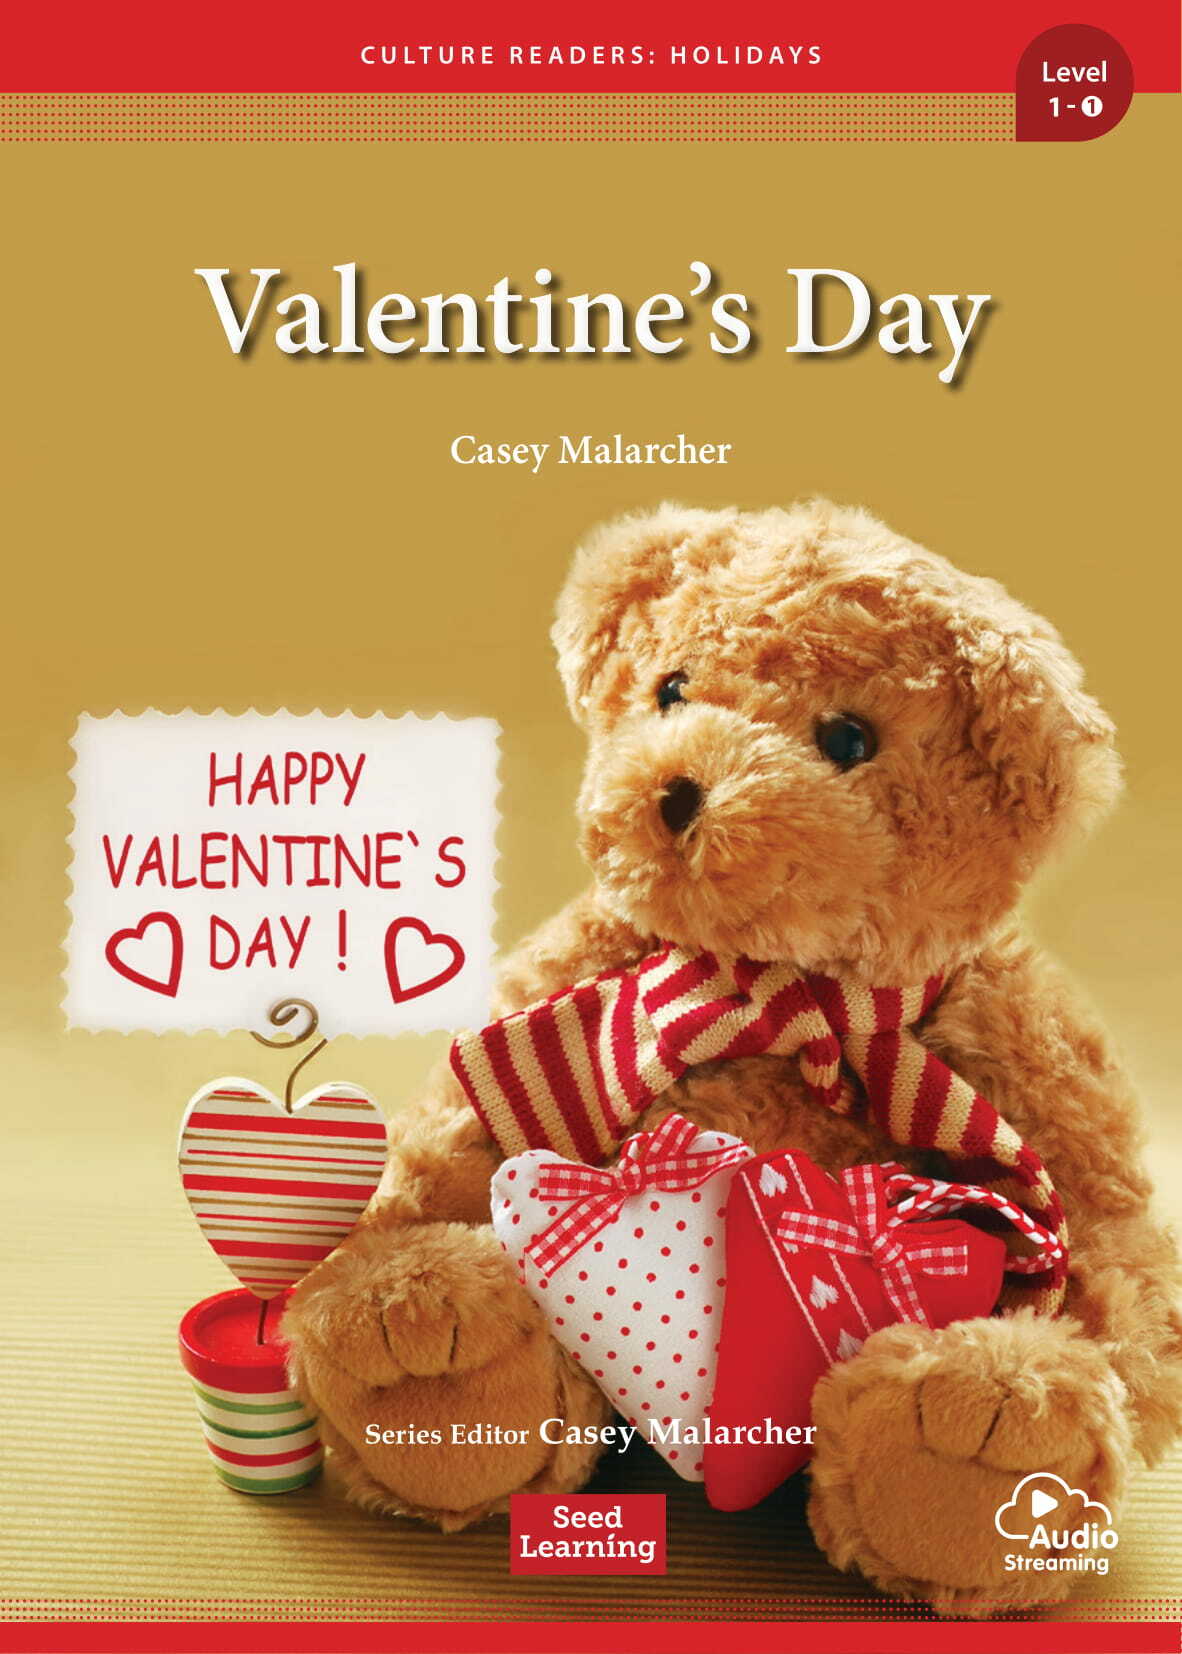 Culture Readers Holidays Level 1 : Valentines Day (Story Book + Audio APP)